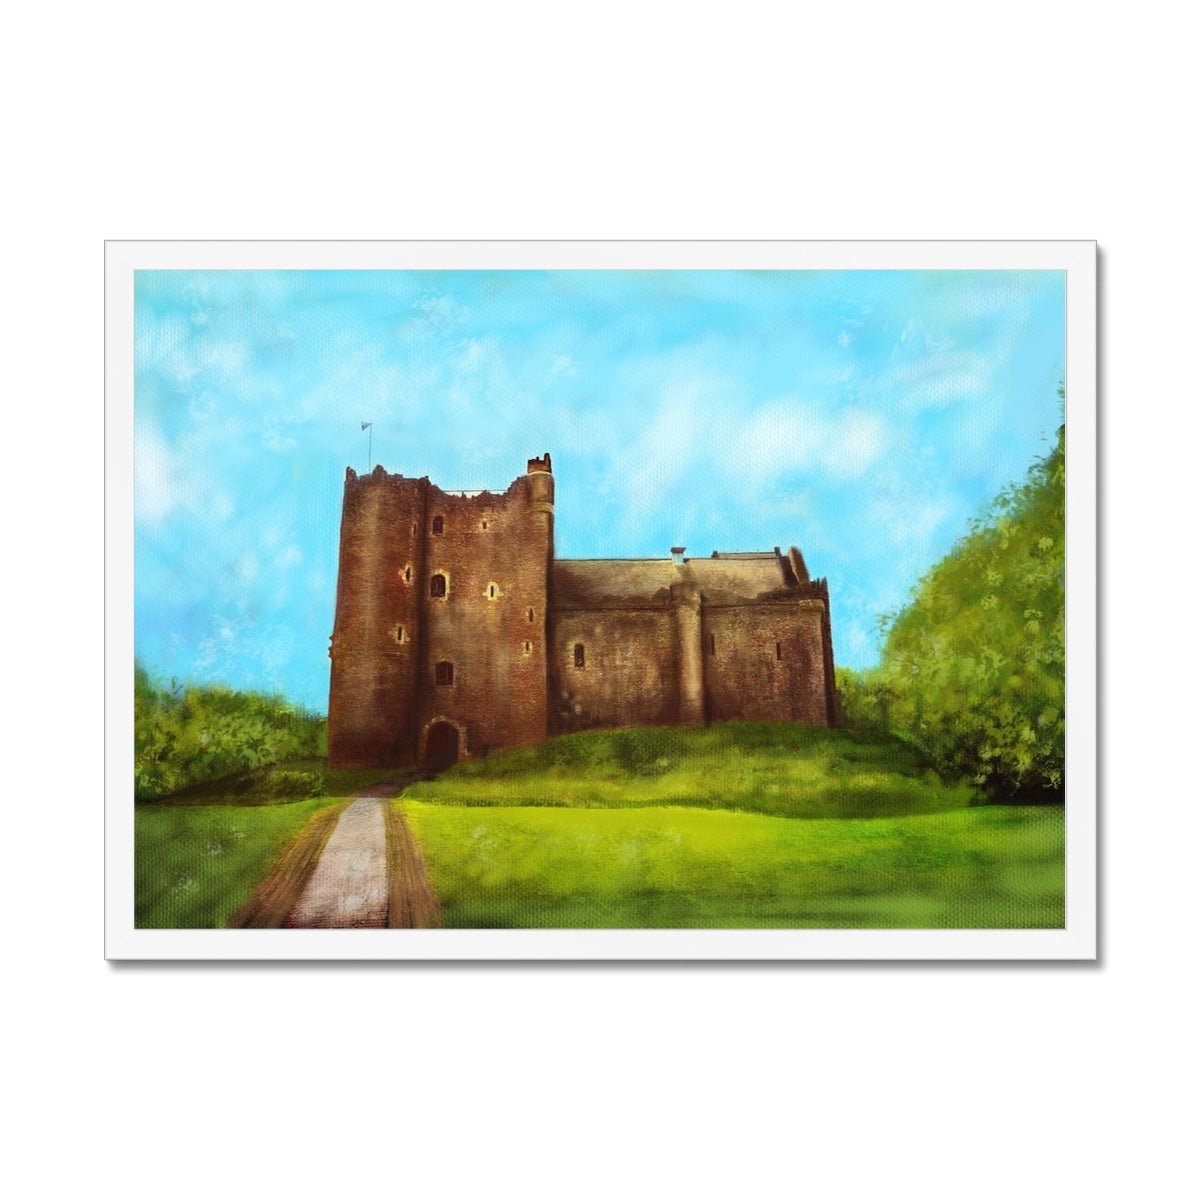 Doune Castle Painting | Framed Prints From Scotland-Framed Prints-Historic & Iconic Scotland Art Gallery-A2 Landscape-White Frame-Paintings, Prints, Homeware, Art Gifts From Scotland By Scottish Artist Kevin Hunter